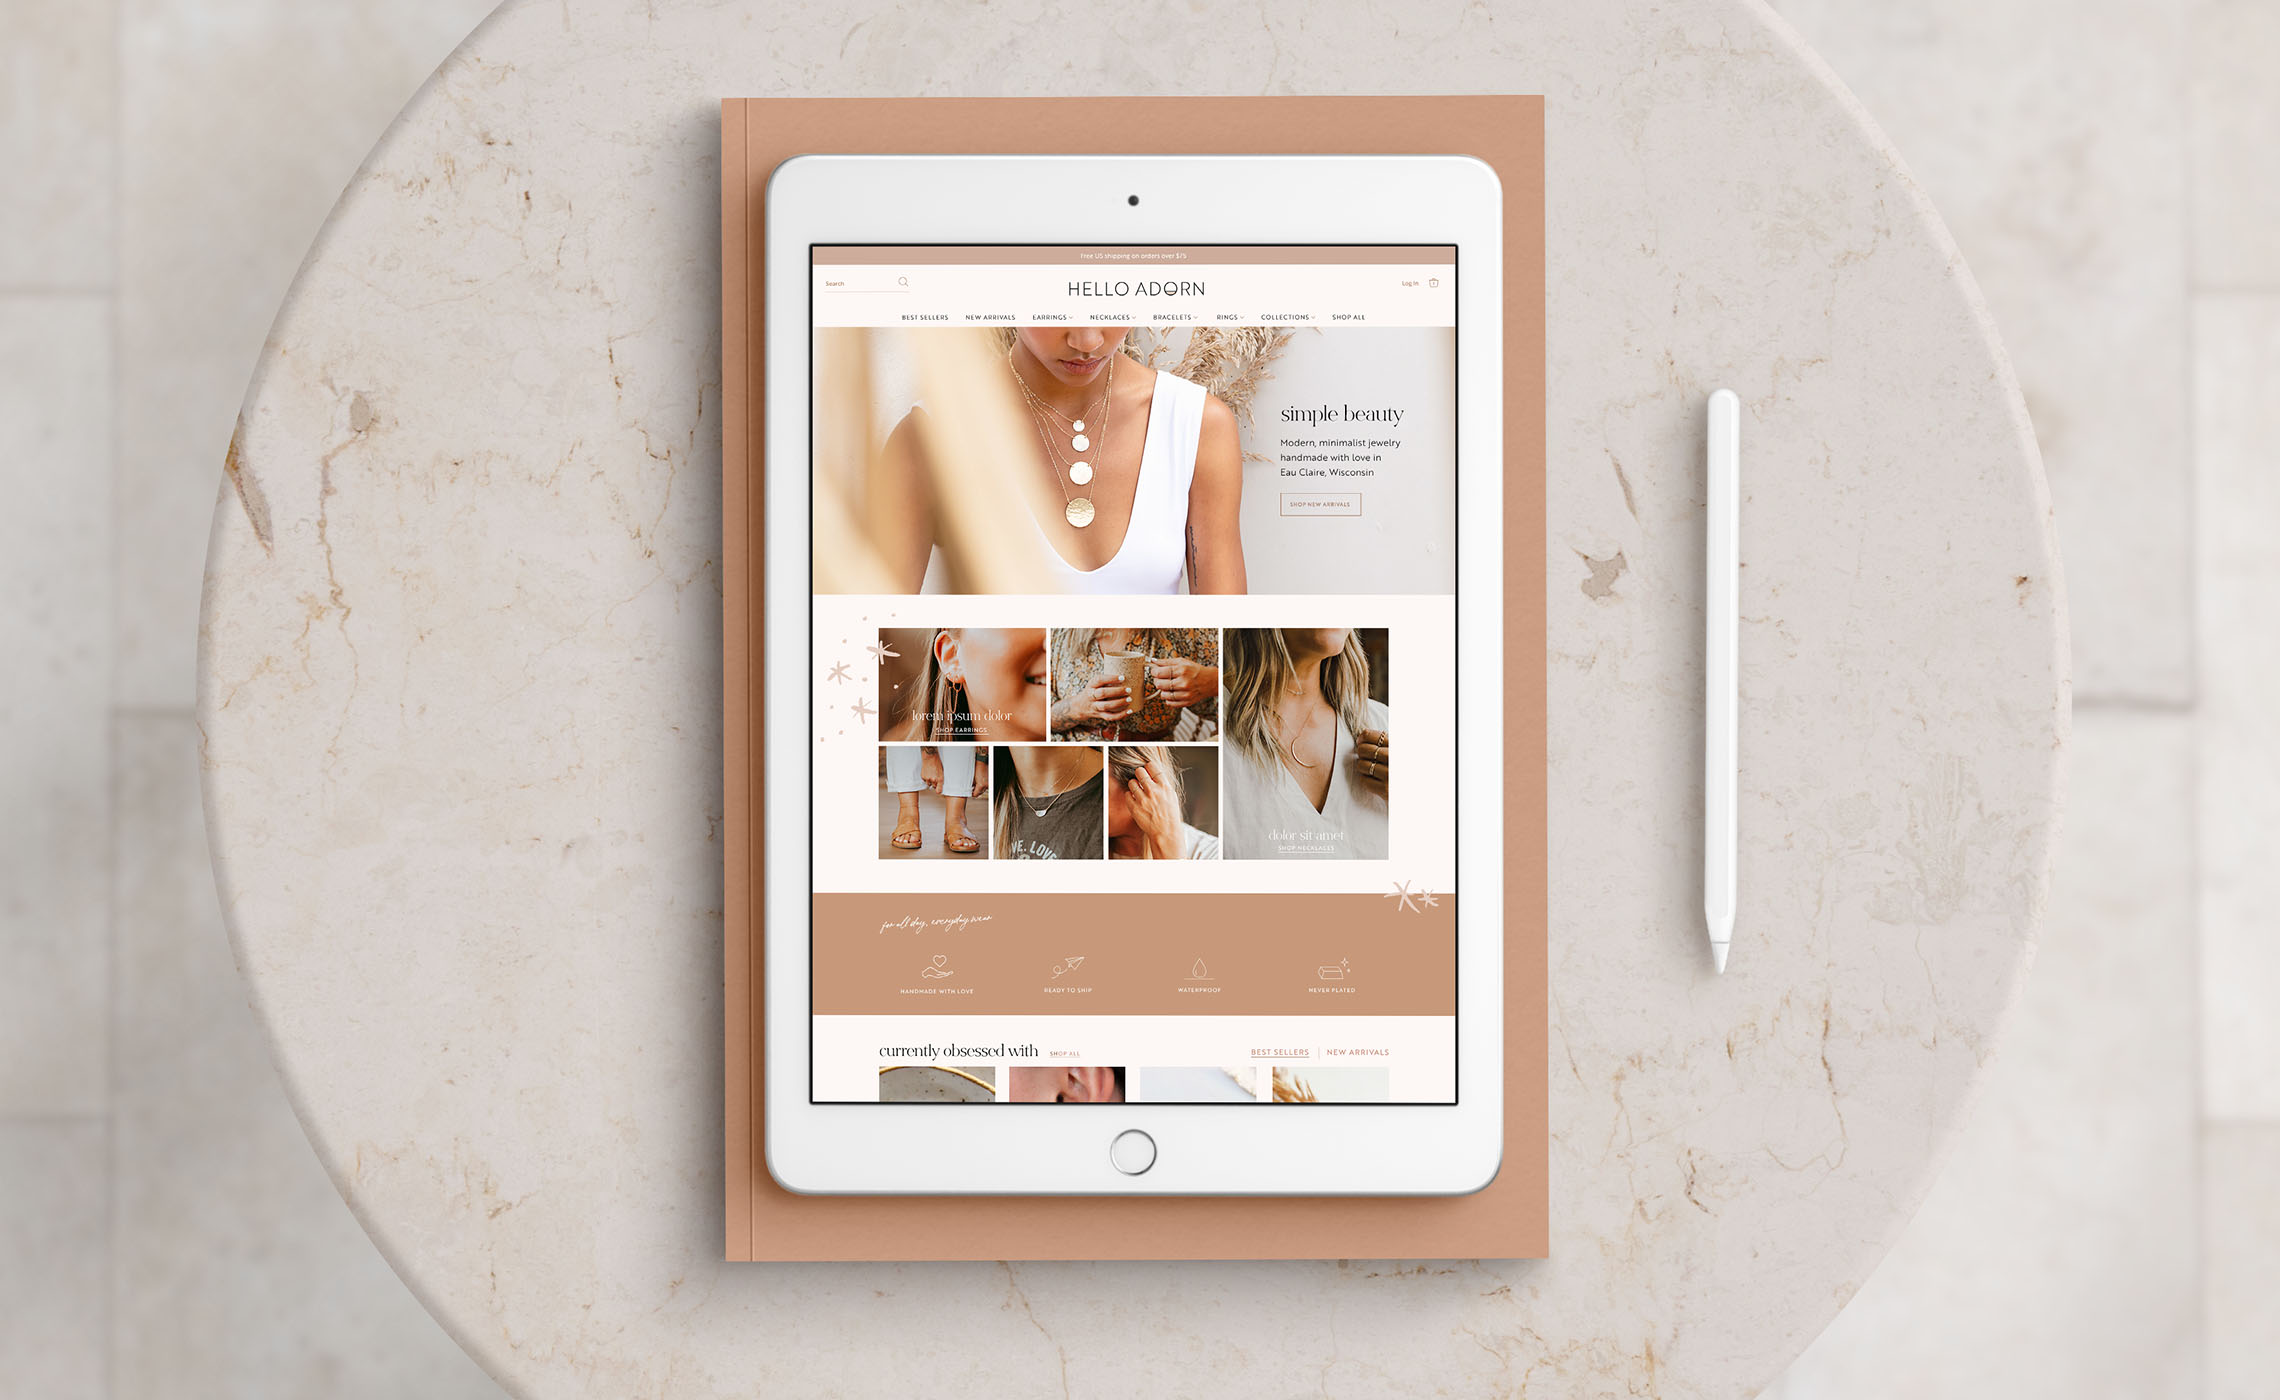 Hello Adorn - Shopify Plus home page design for a hand-made jewelry brand.